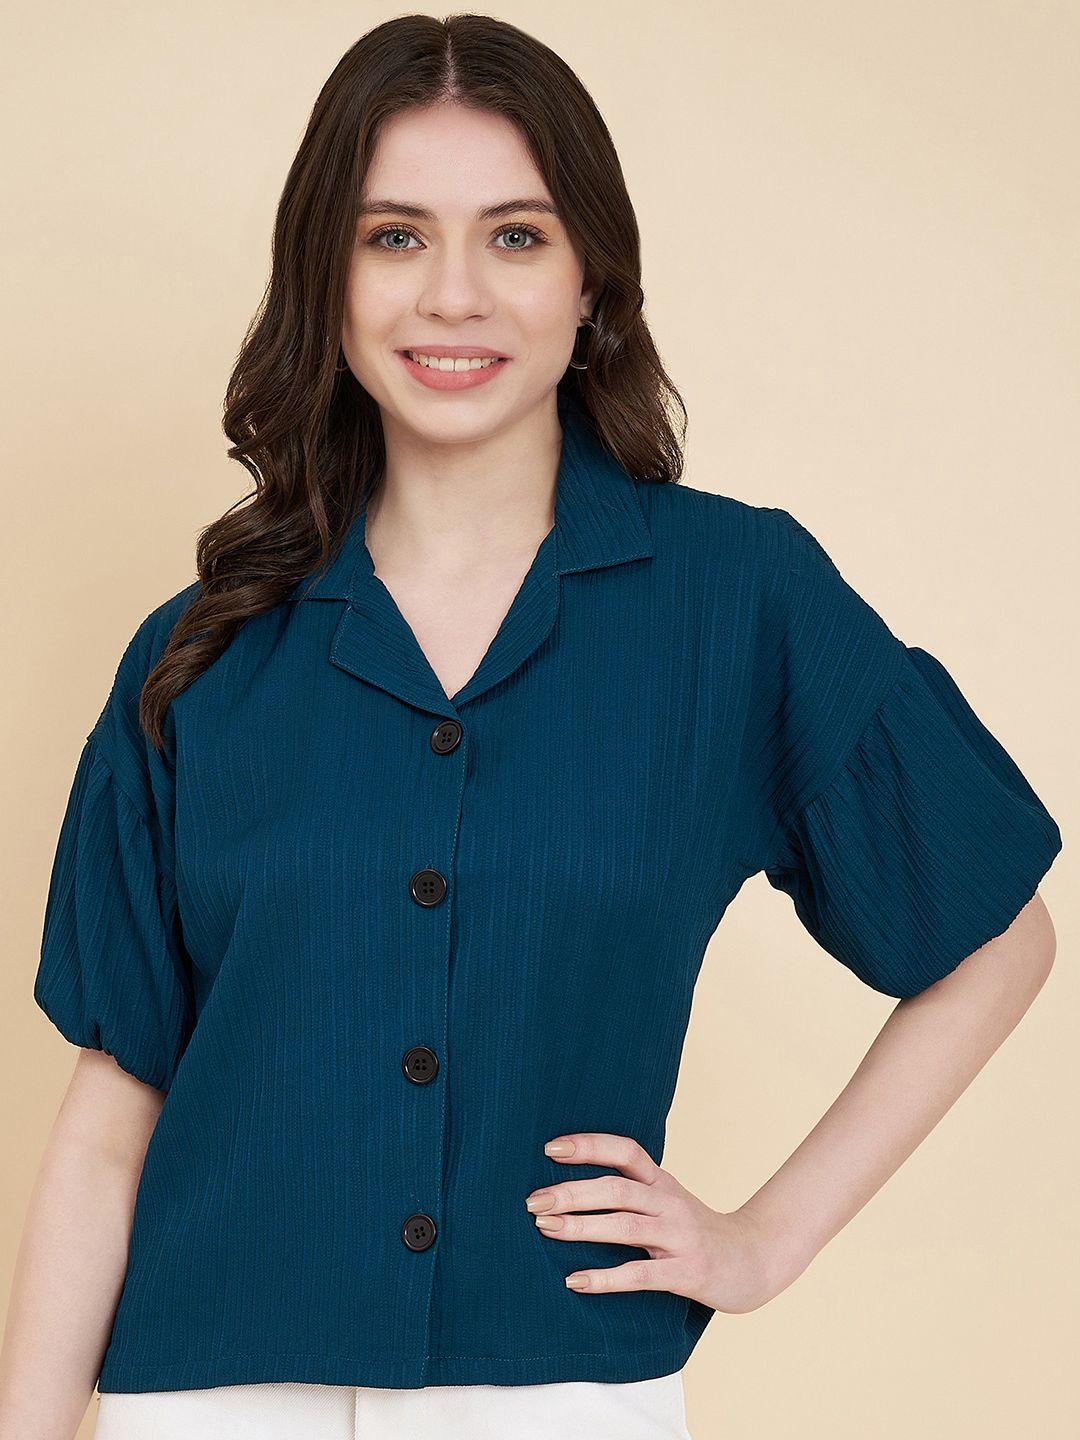 vairagee women teal classic boxy striped casual shirt